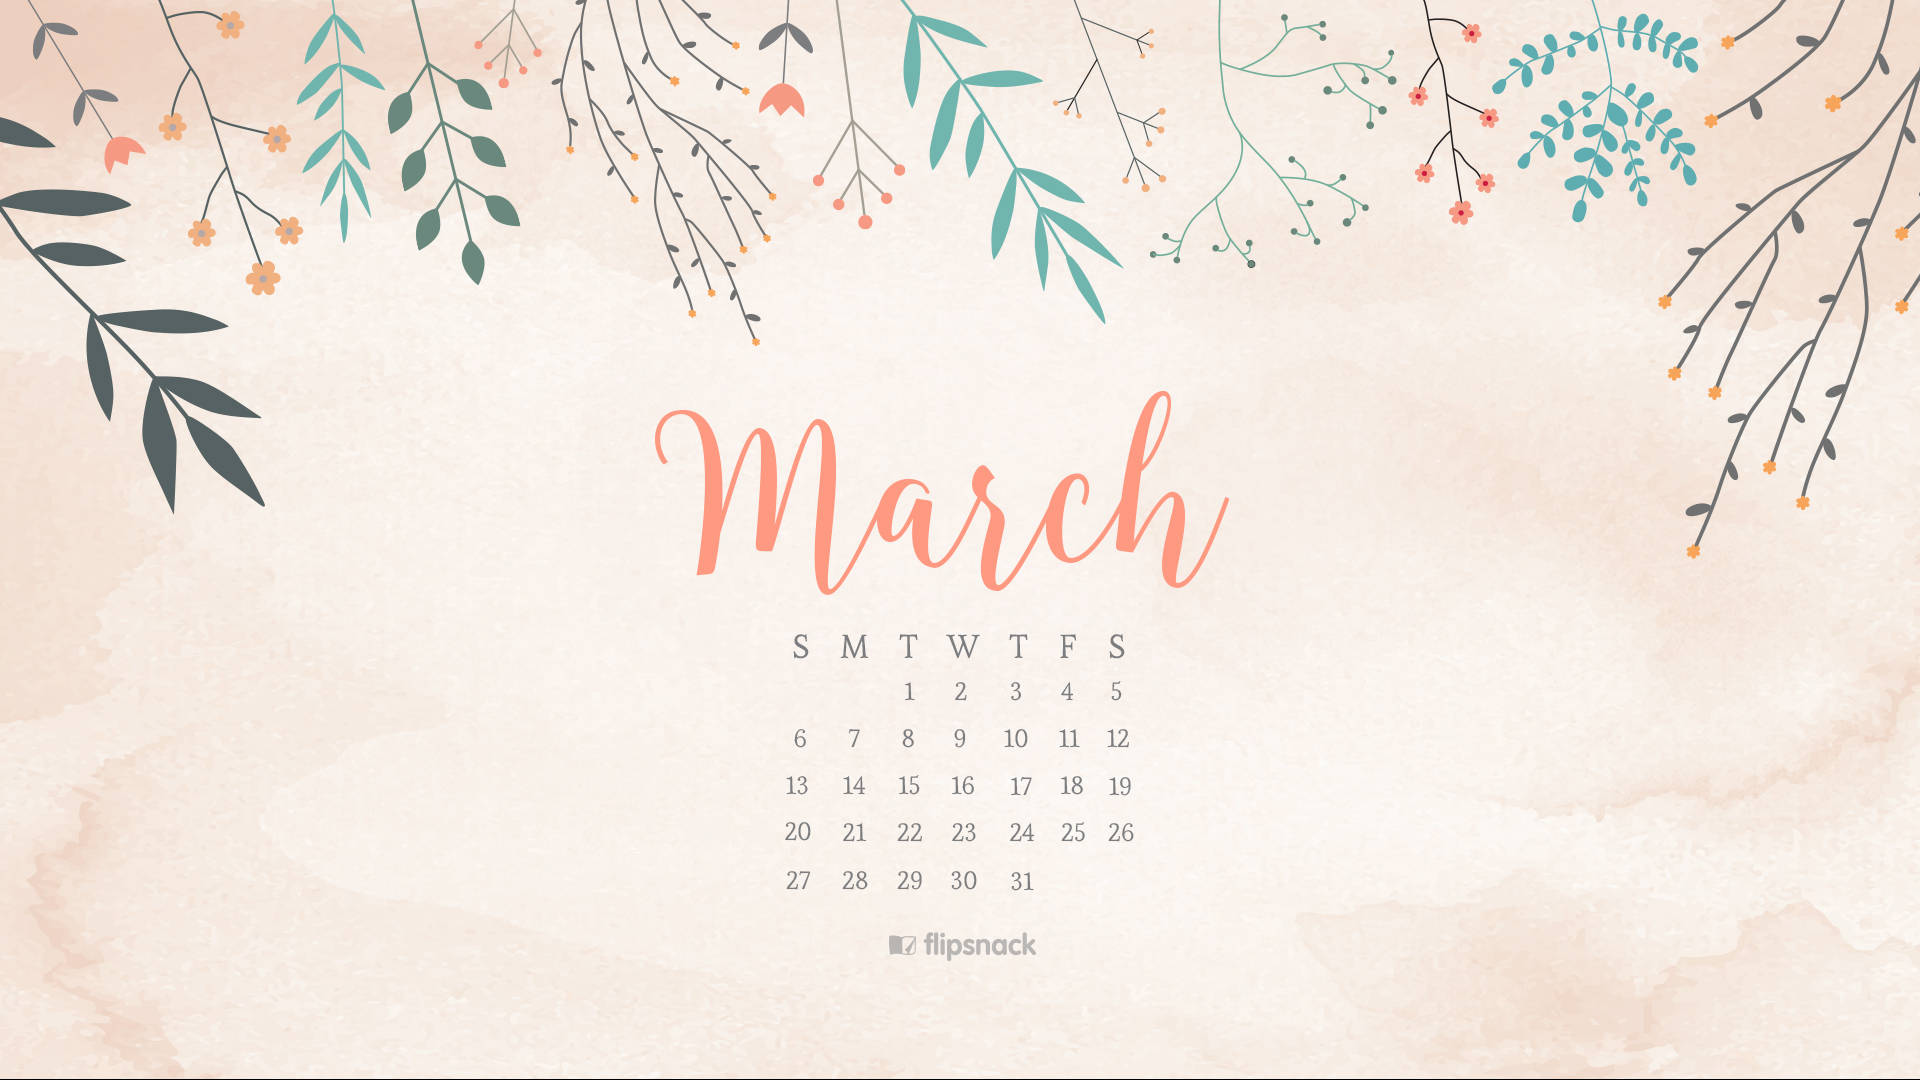 Capturing The Essence Of March: A Time For Rebirth